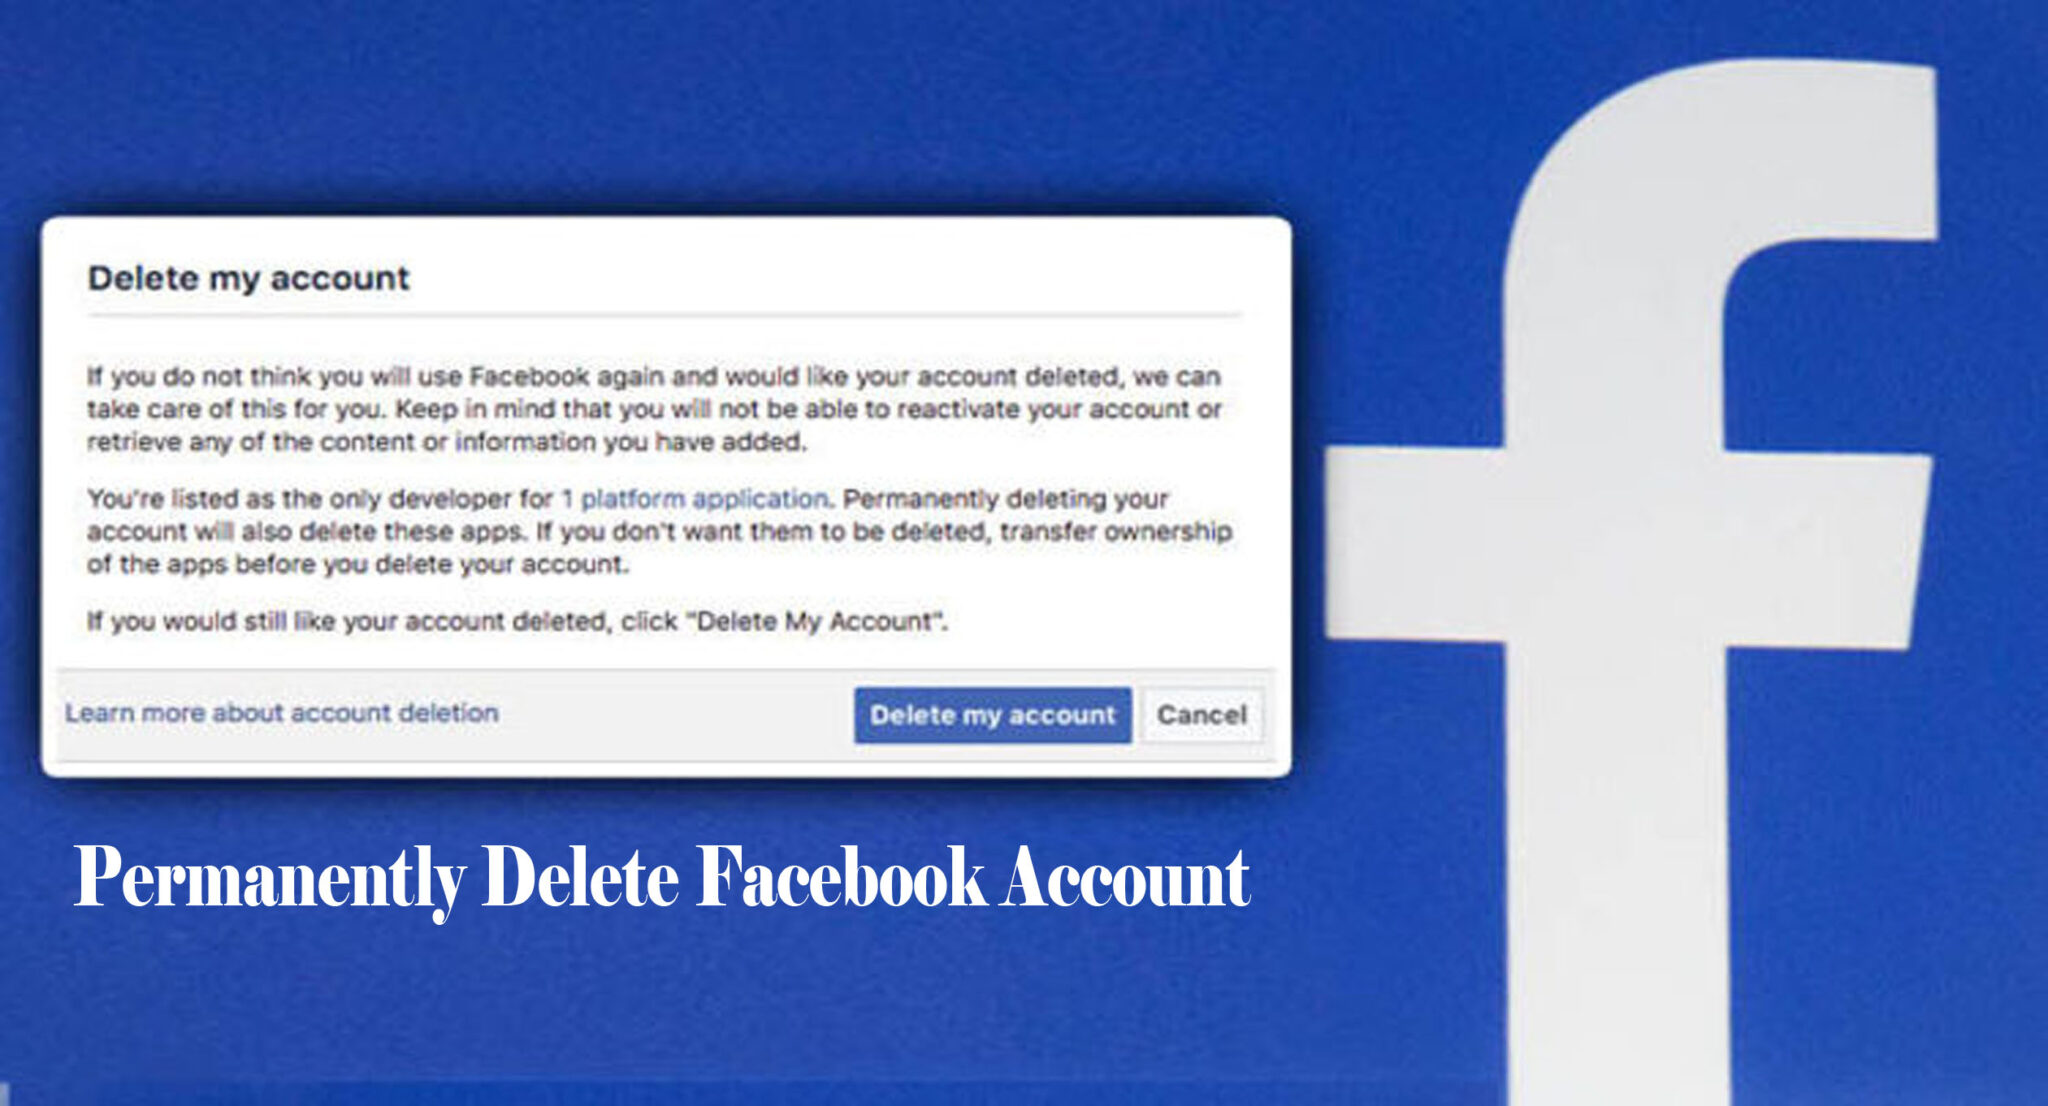 T me aged accounts. Delete Facebook account. Facebook account. Facebook account deletion. How to delete Facebook account.